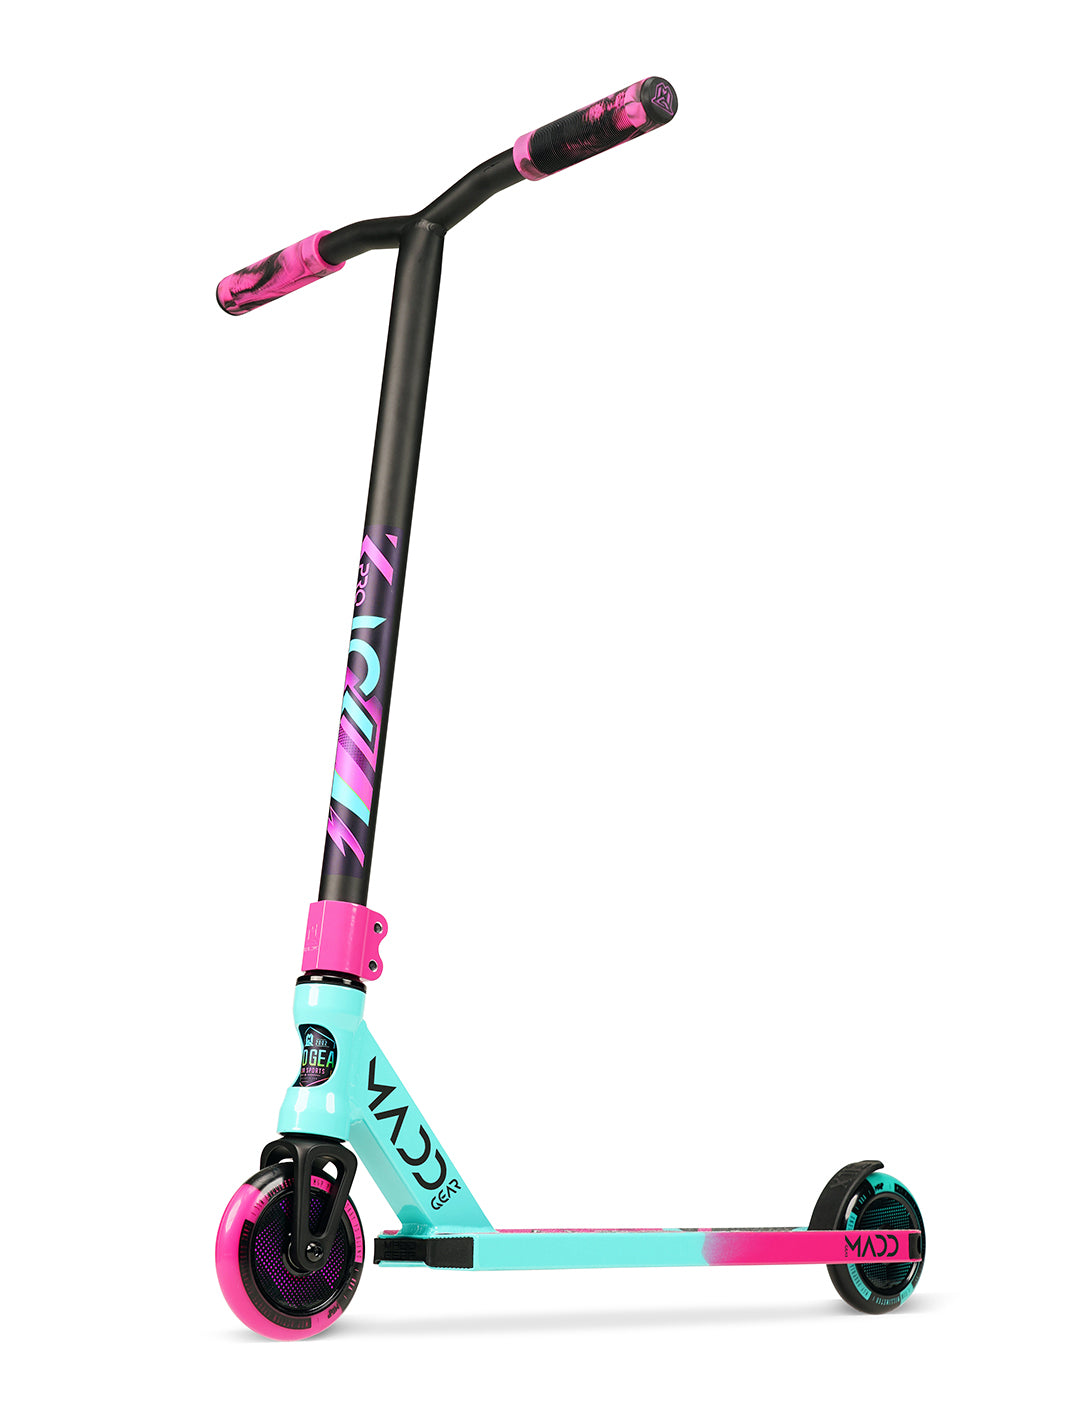 Madd Gear Kick Pro Stunt Scooter Teal Pink Complete Strong 